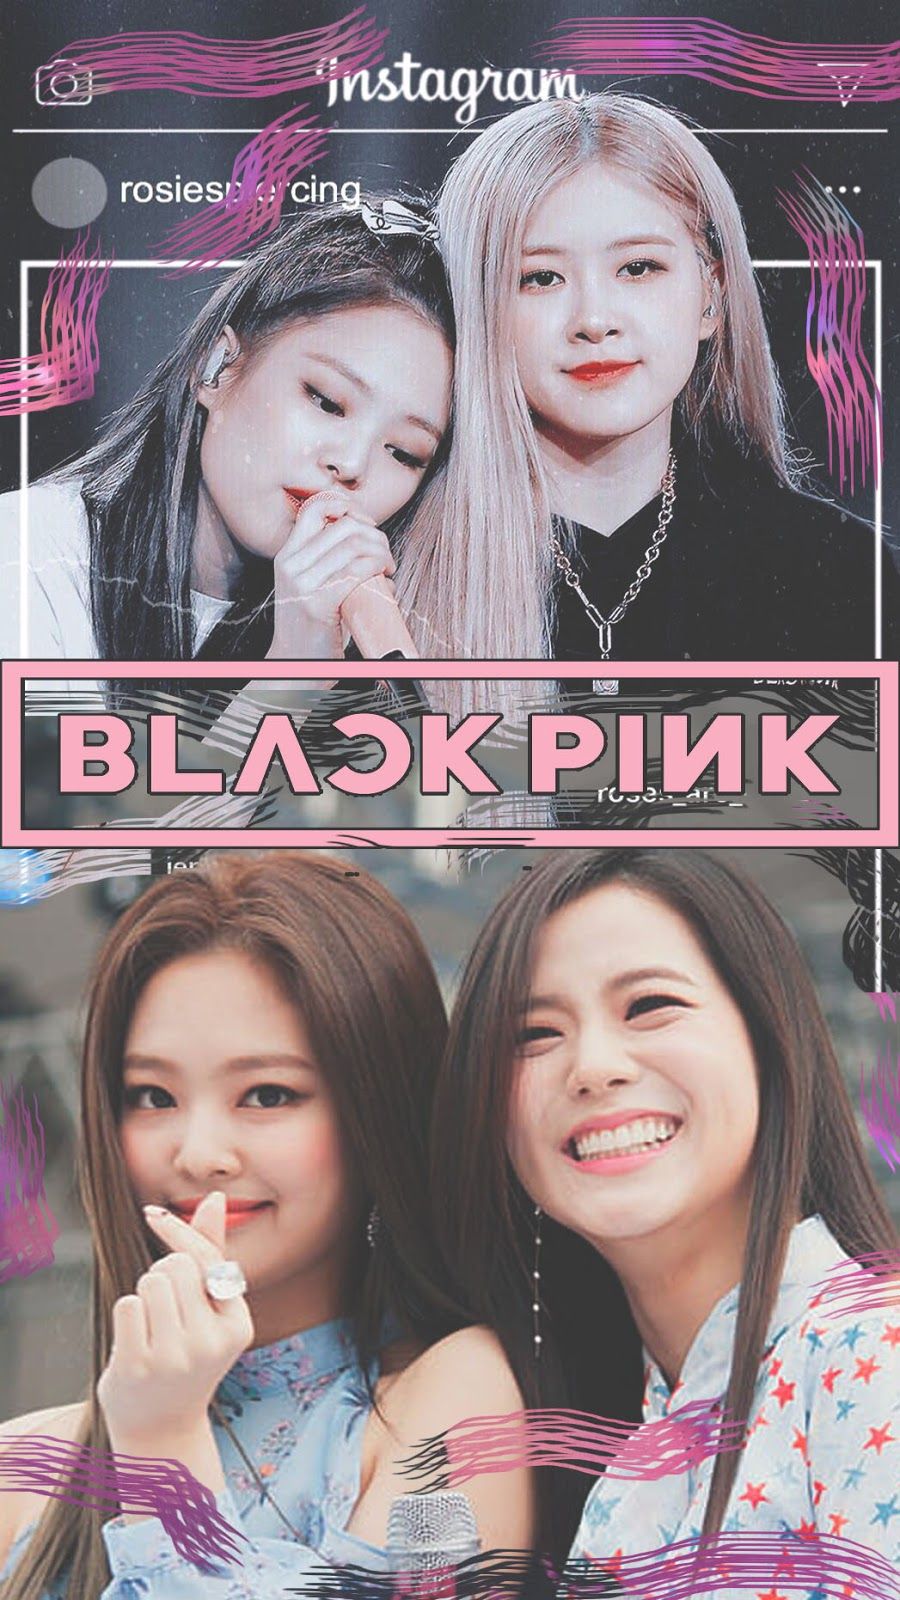 Blackpink The Show Wallpapers - Wallpaper Cave